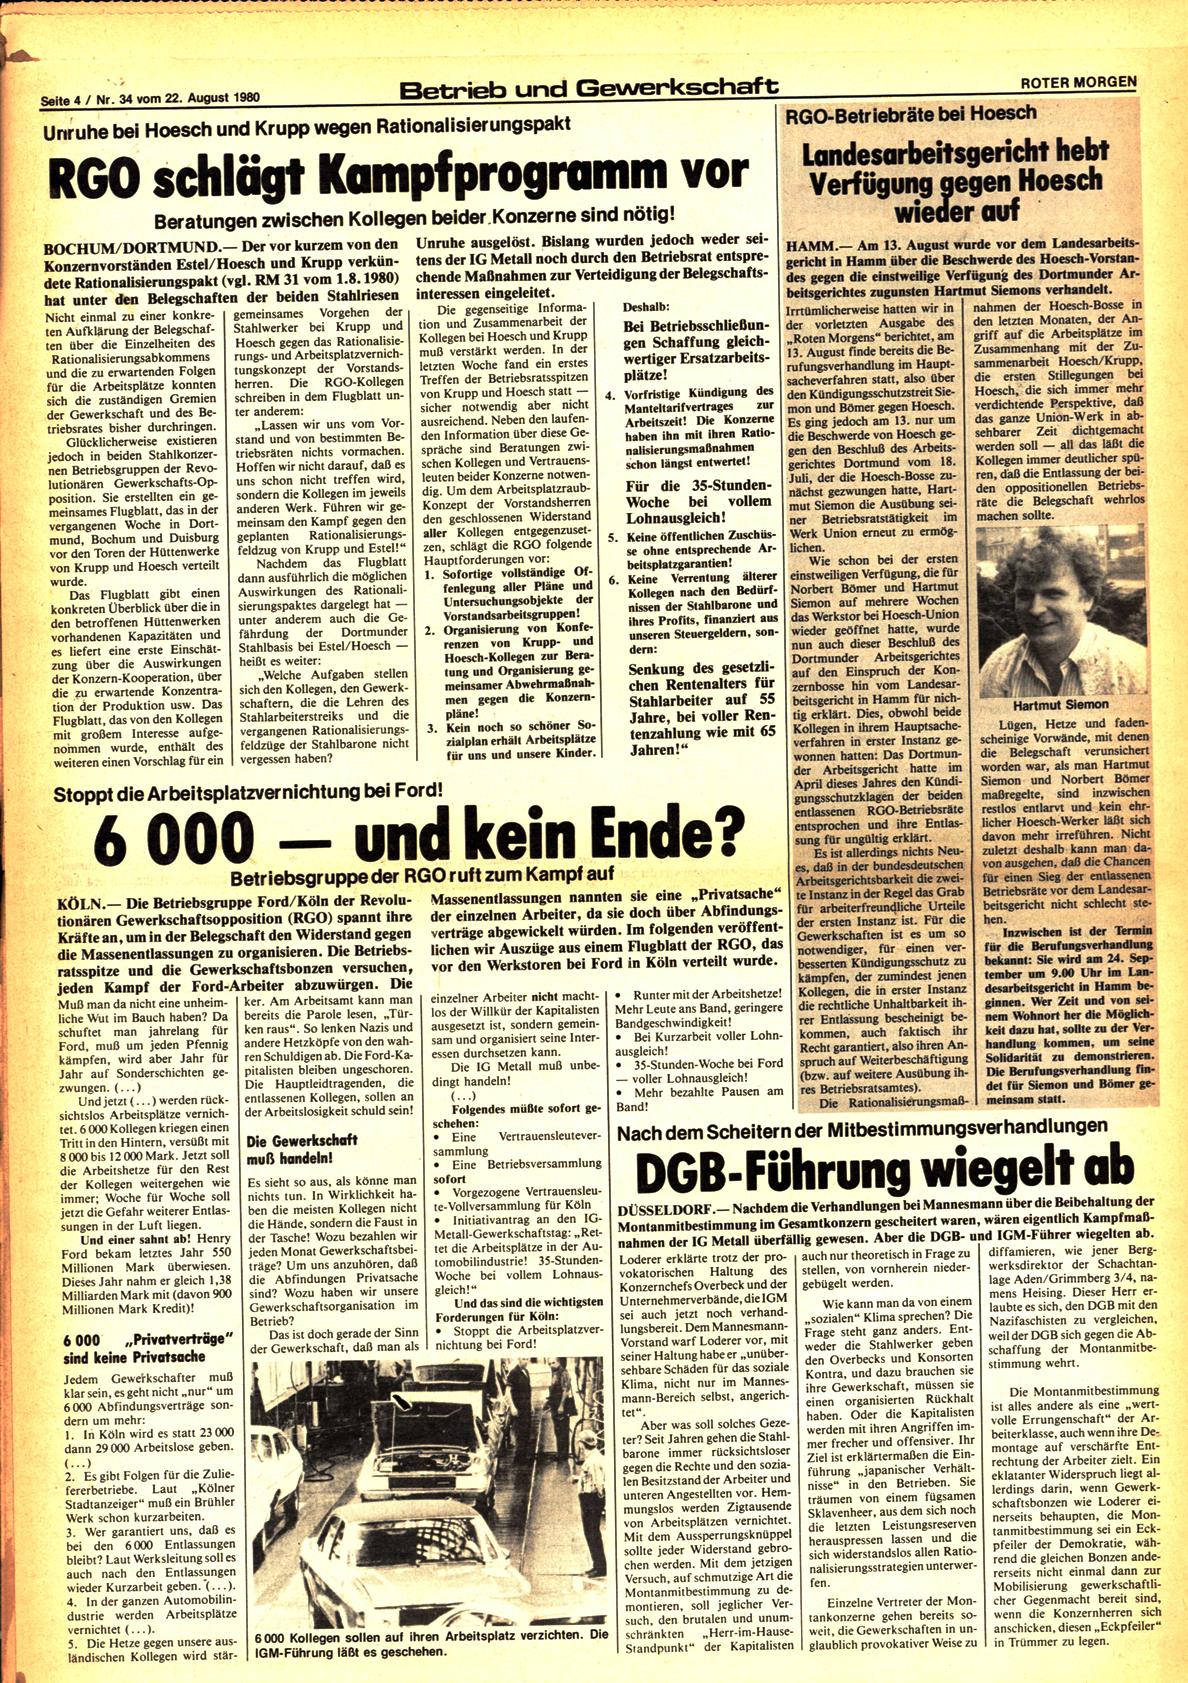 Roter Morgen, 14. Jg., 22. August 1980, Nr. 34, Seite 4